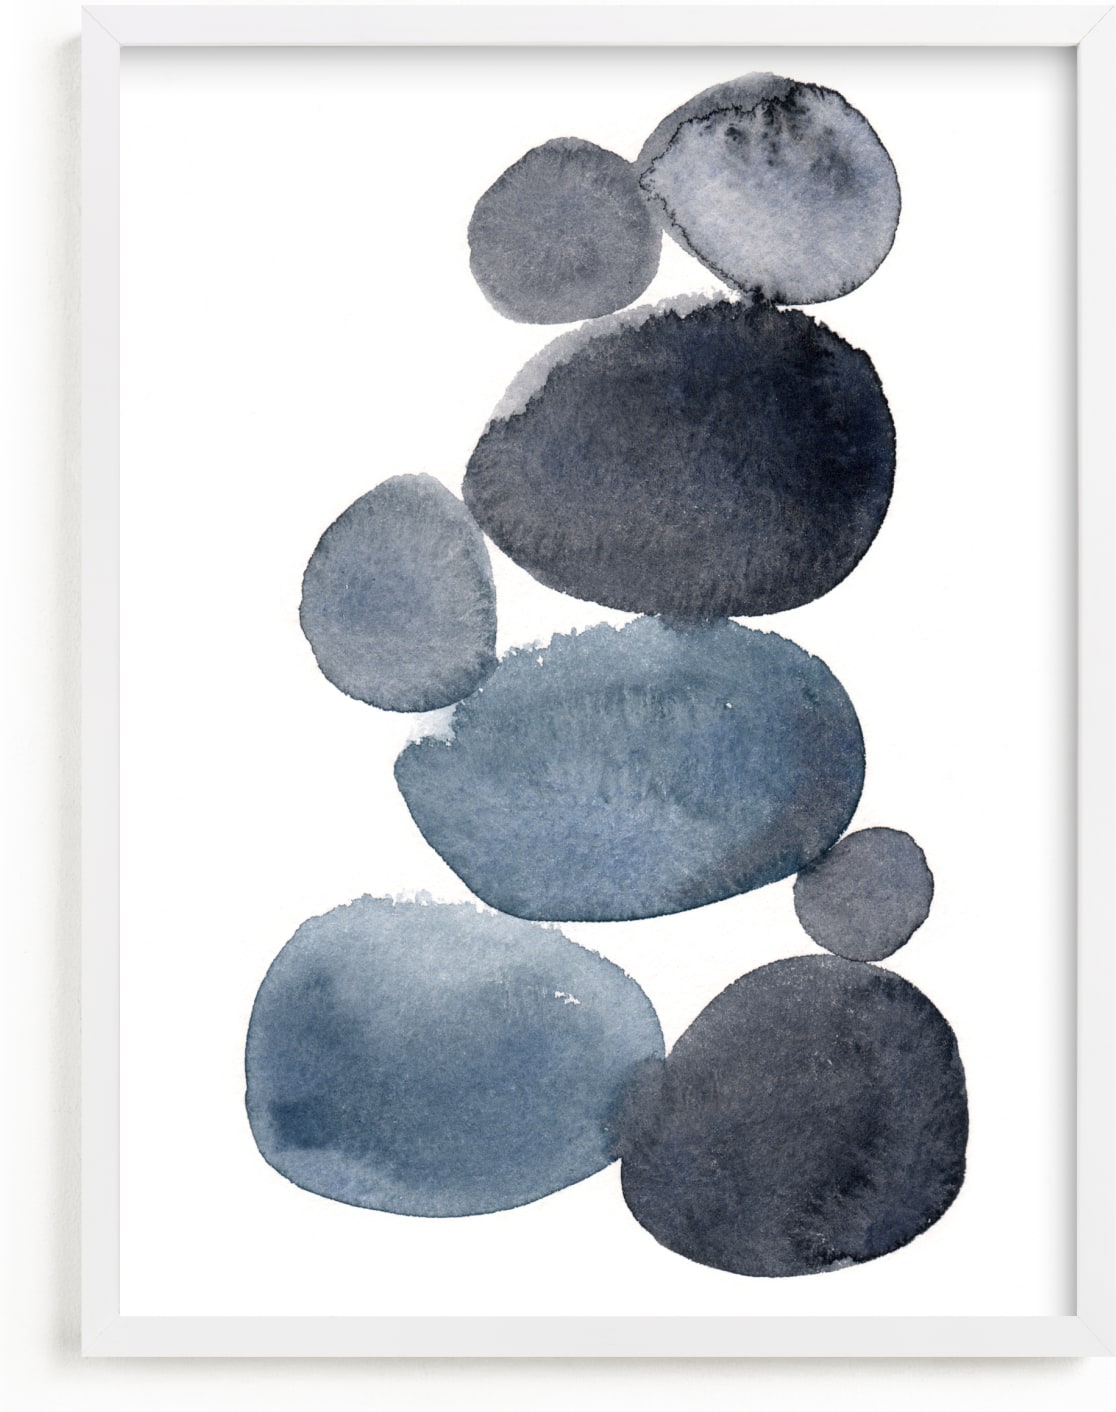 This is a blue art by Kelly Witmer called stone pile.